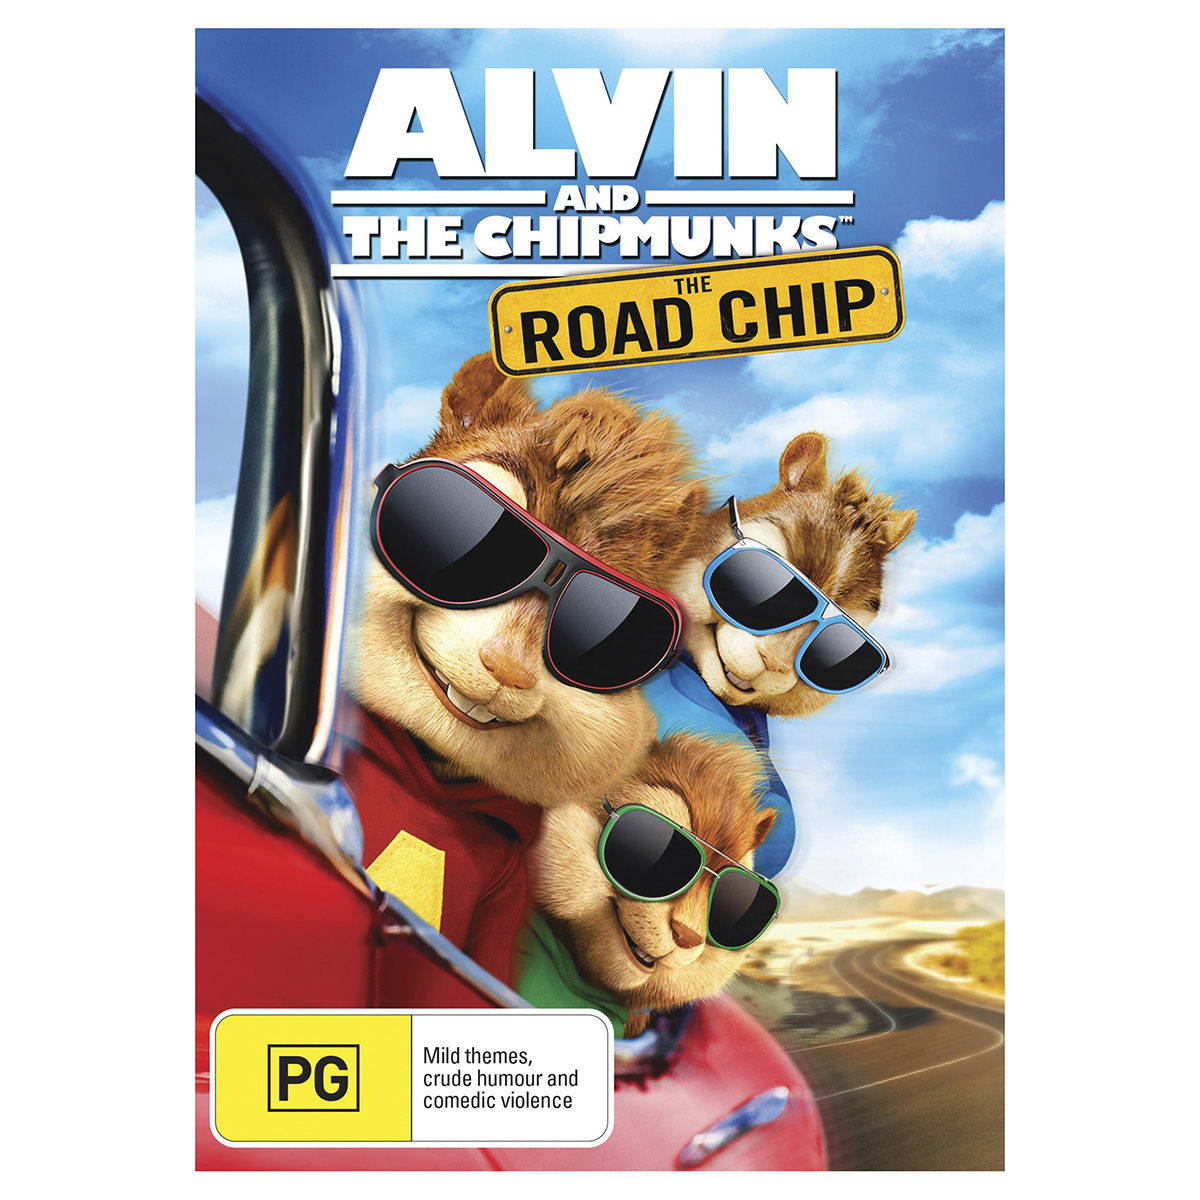 Alvin and the Chipmunks 4: The Road Chip - DVD